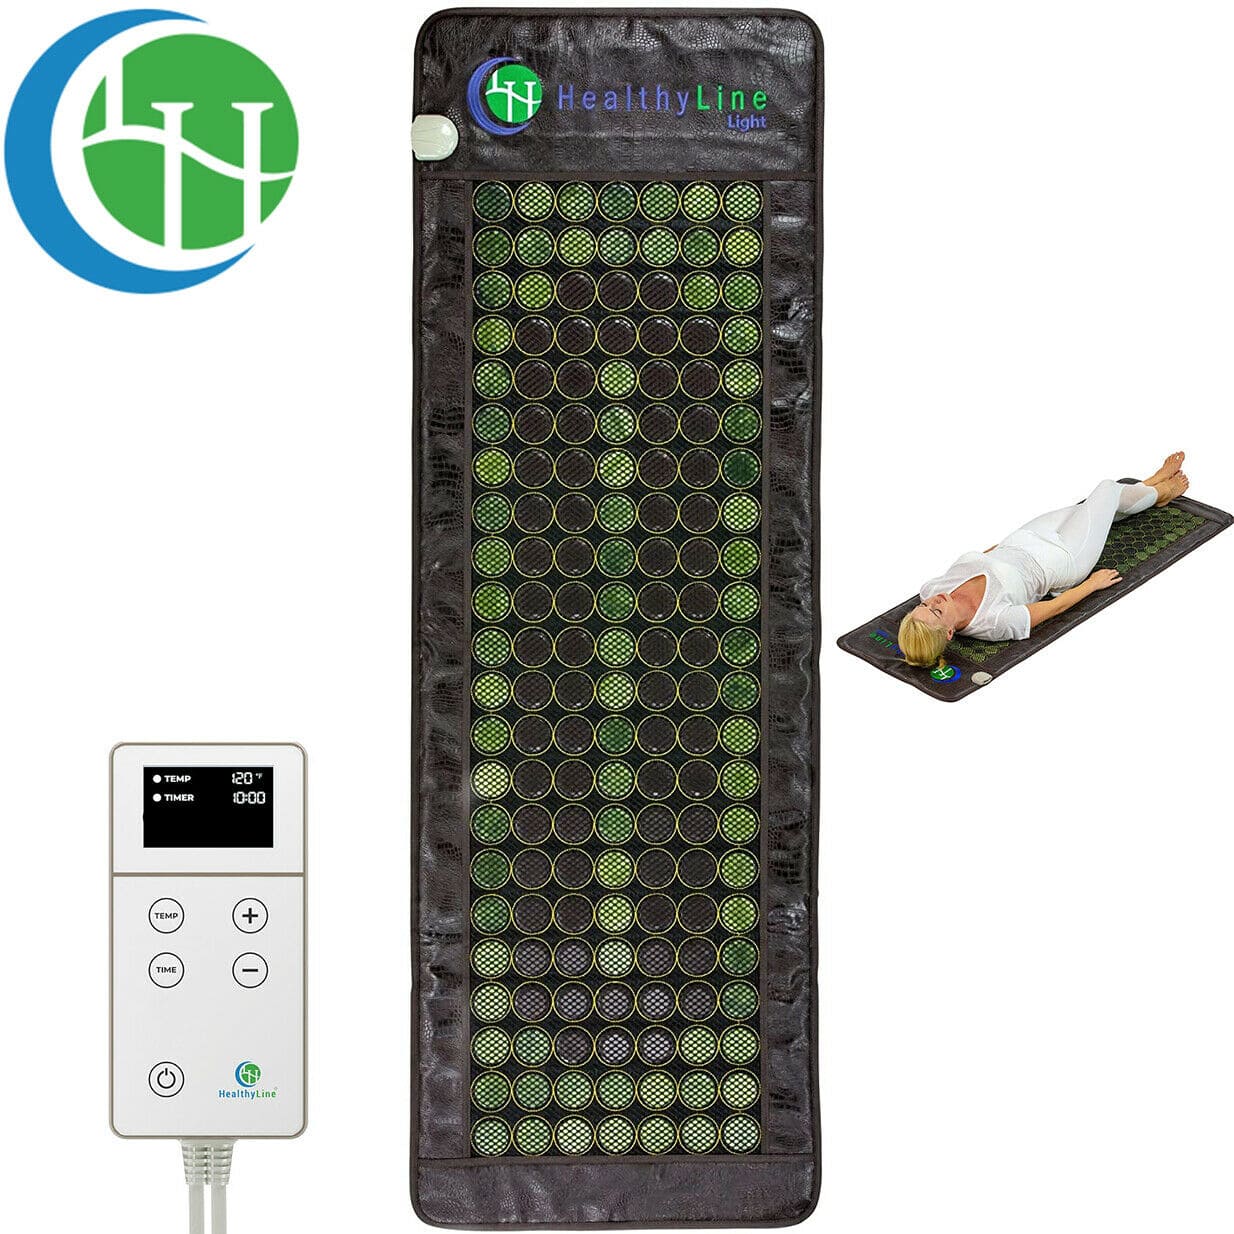 FAR Infrared Heating Pad 72 x 24- Jade Tourmaline Heating Pad - Electric Therapy Mat - HealthyLine